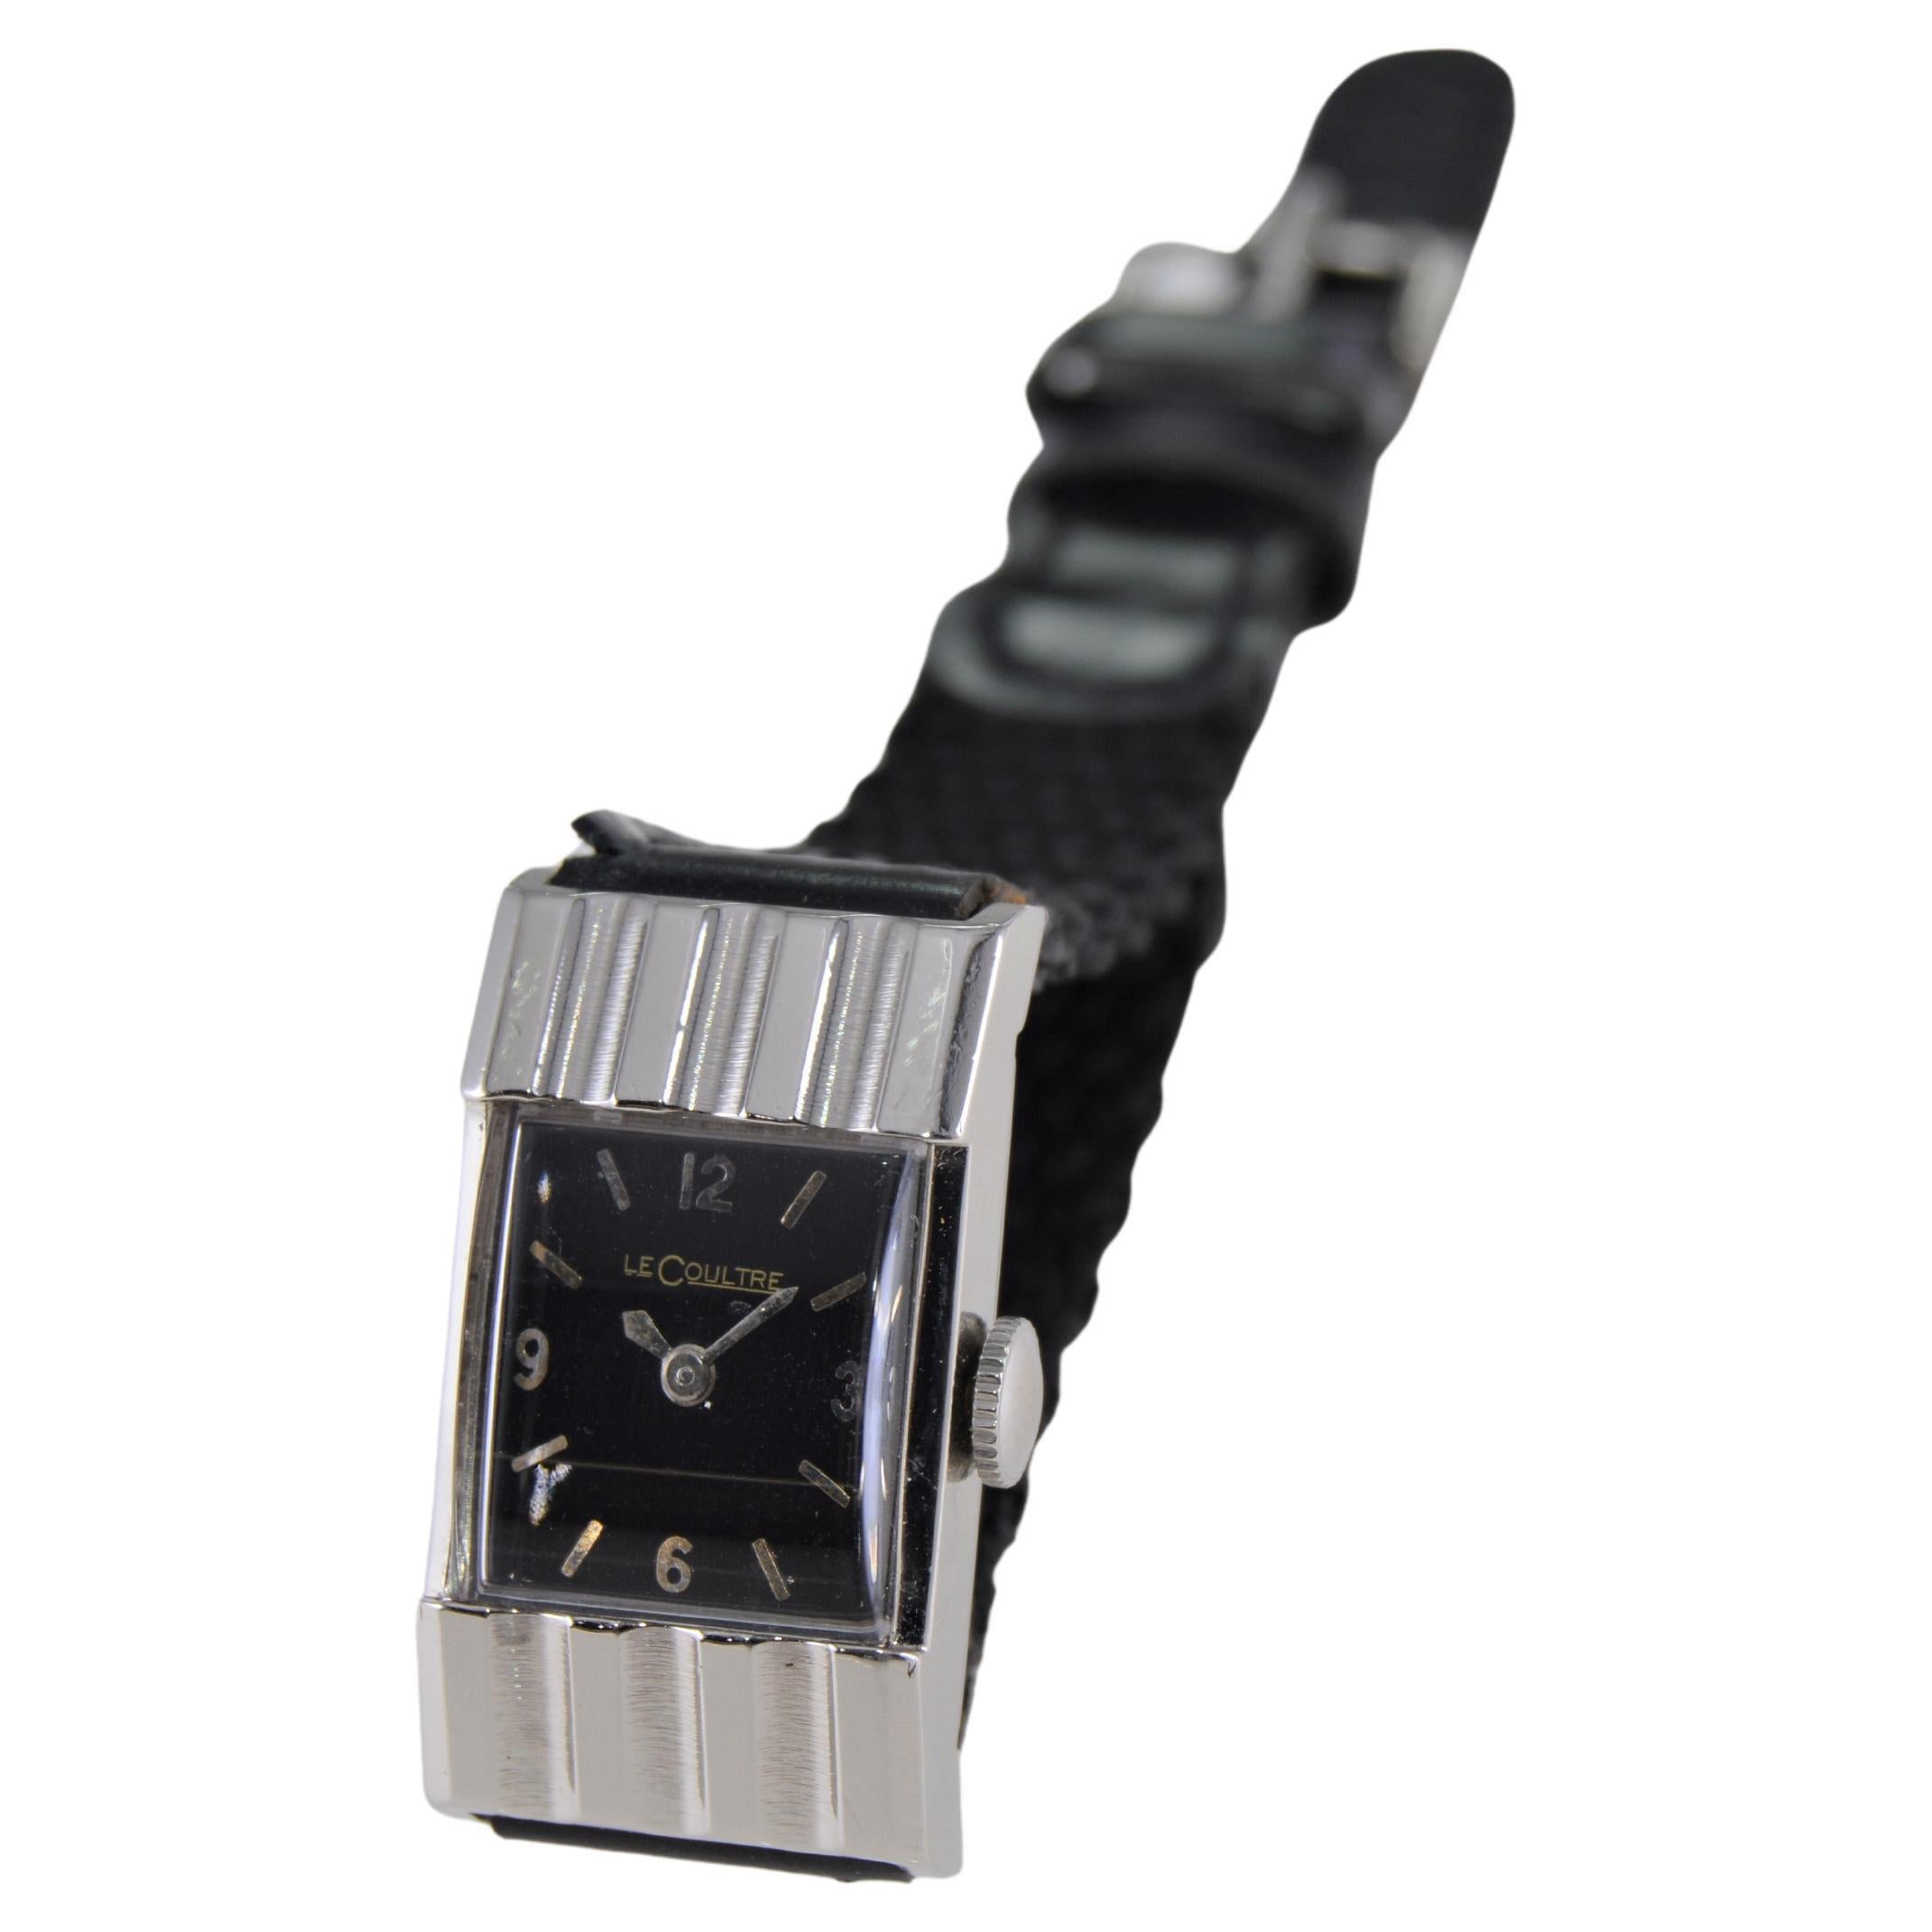 LeCoultre Ladies Watch with Rare Black Dial, Mid-Century Modern 1950s Swiss In Excellent Condition For Sale In Long Beach, CA